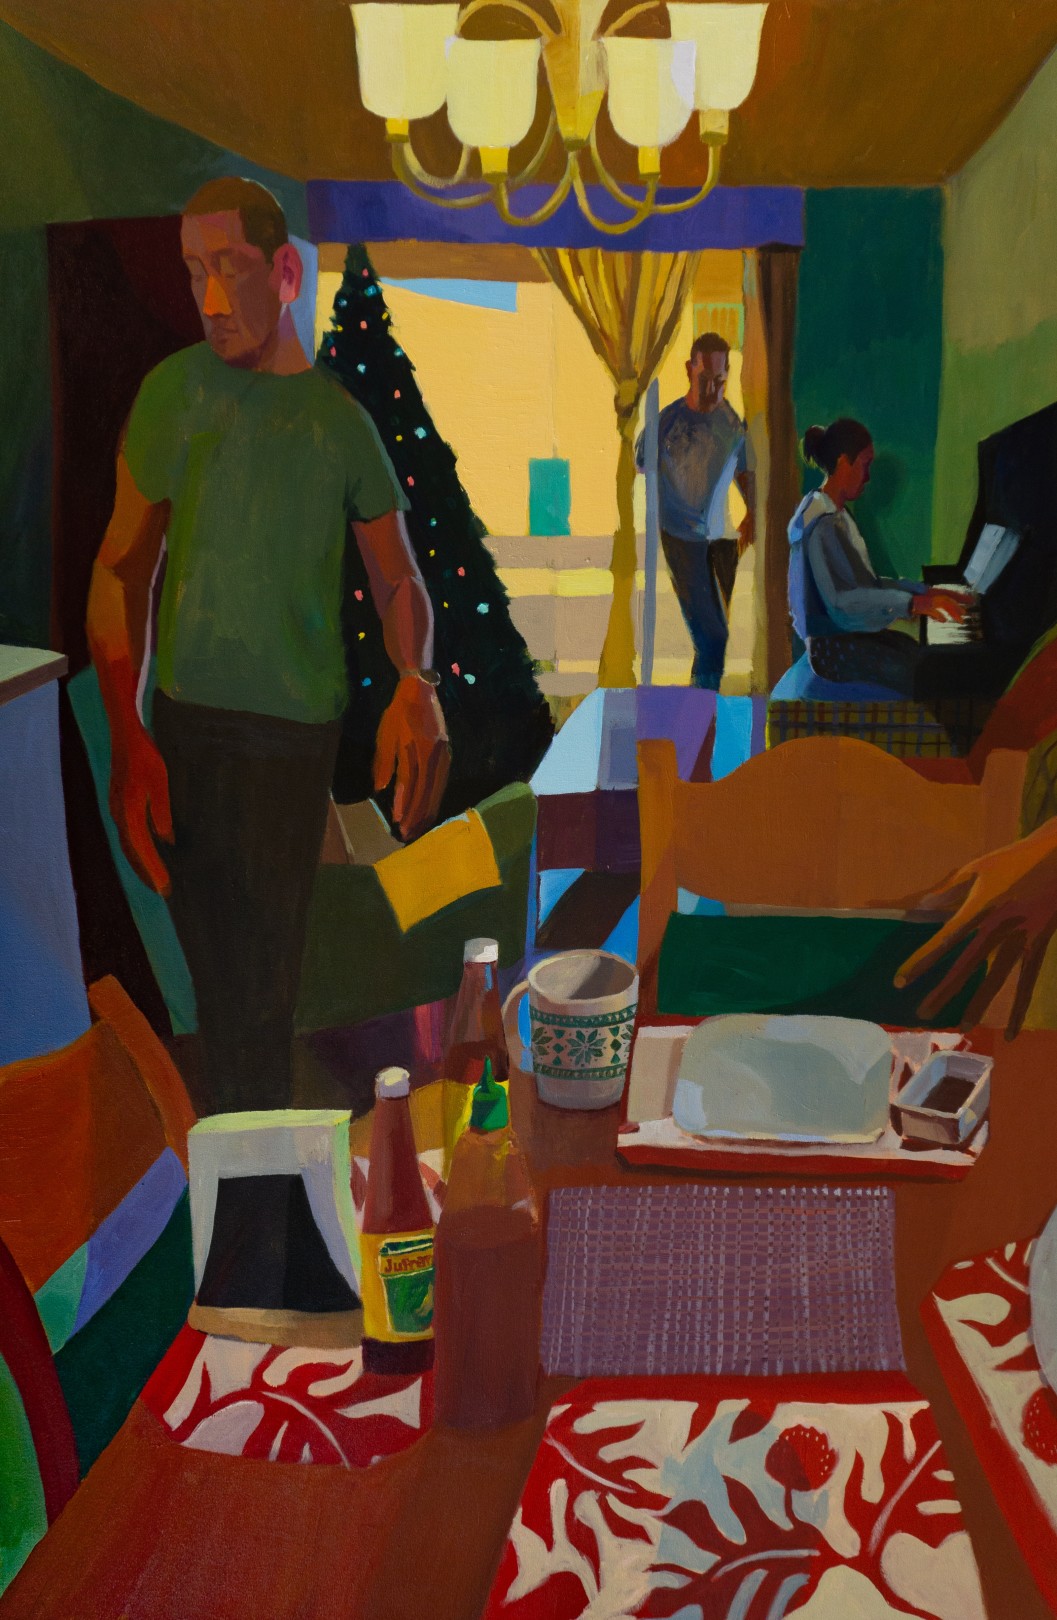 Christmas in California (Auntie Nen’s Apartment), 2021 Acrylic and oil pastel on canvas 152.5 x 101.5 cm. / 60 x 40 in.